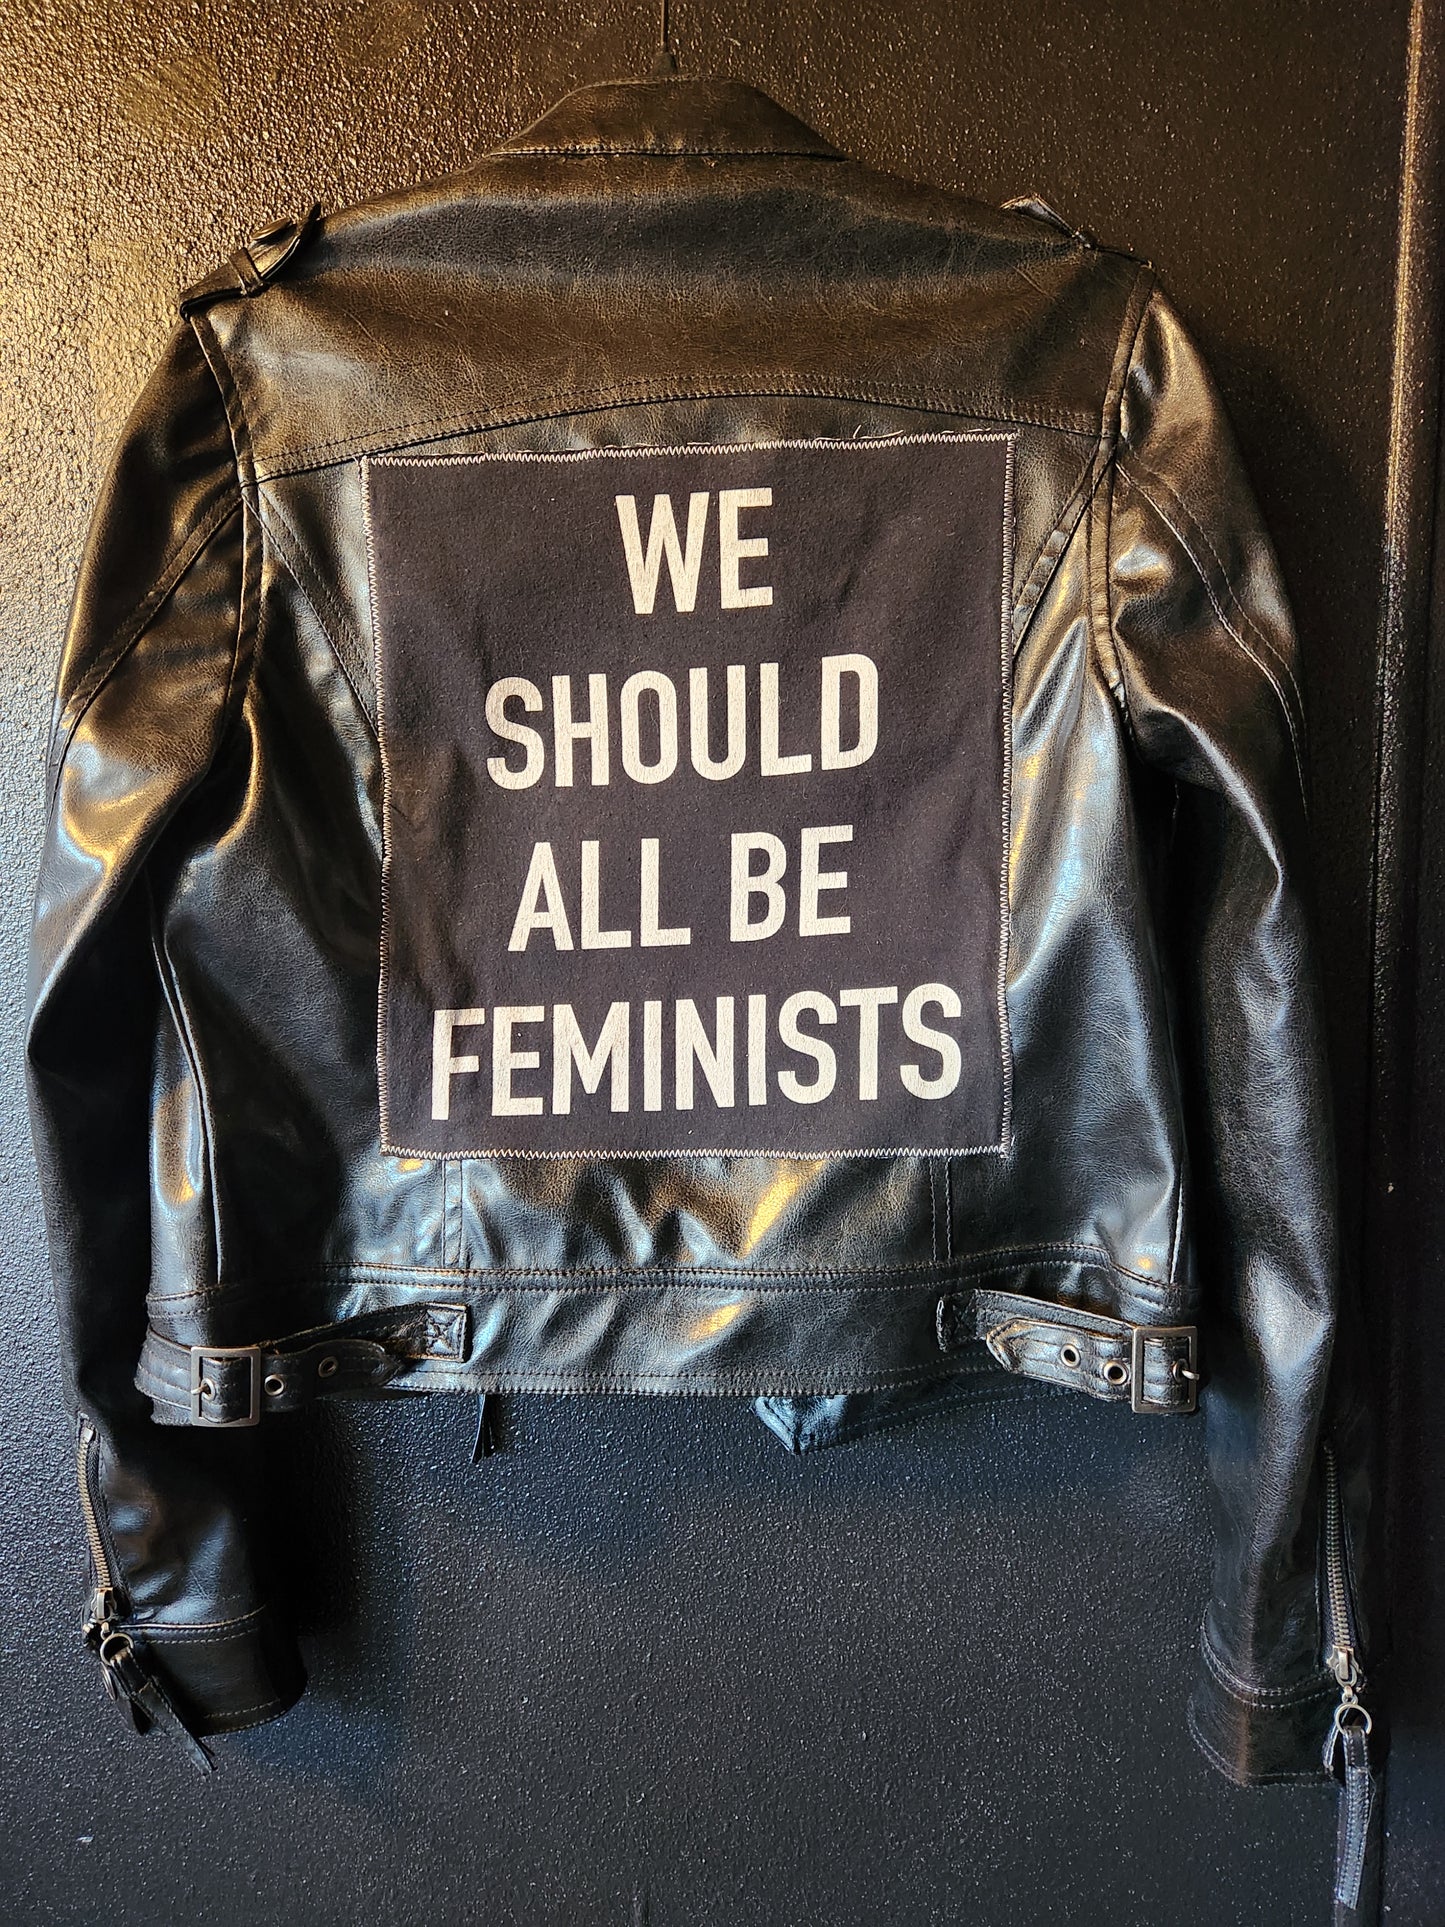 "We Should All Be Feminists" motorcycle jacket